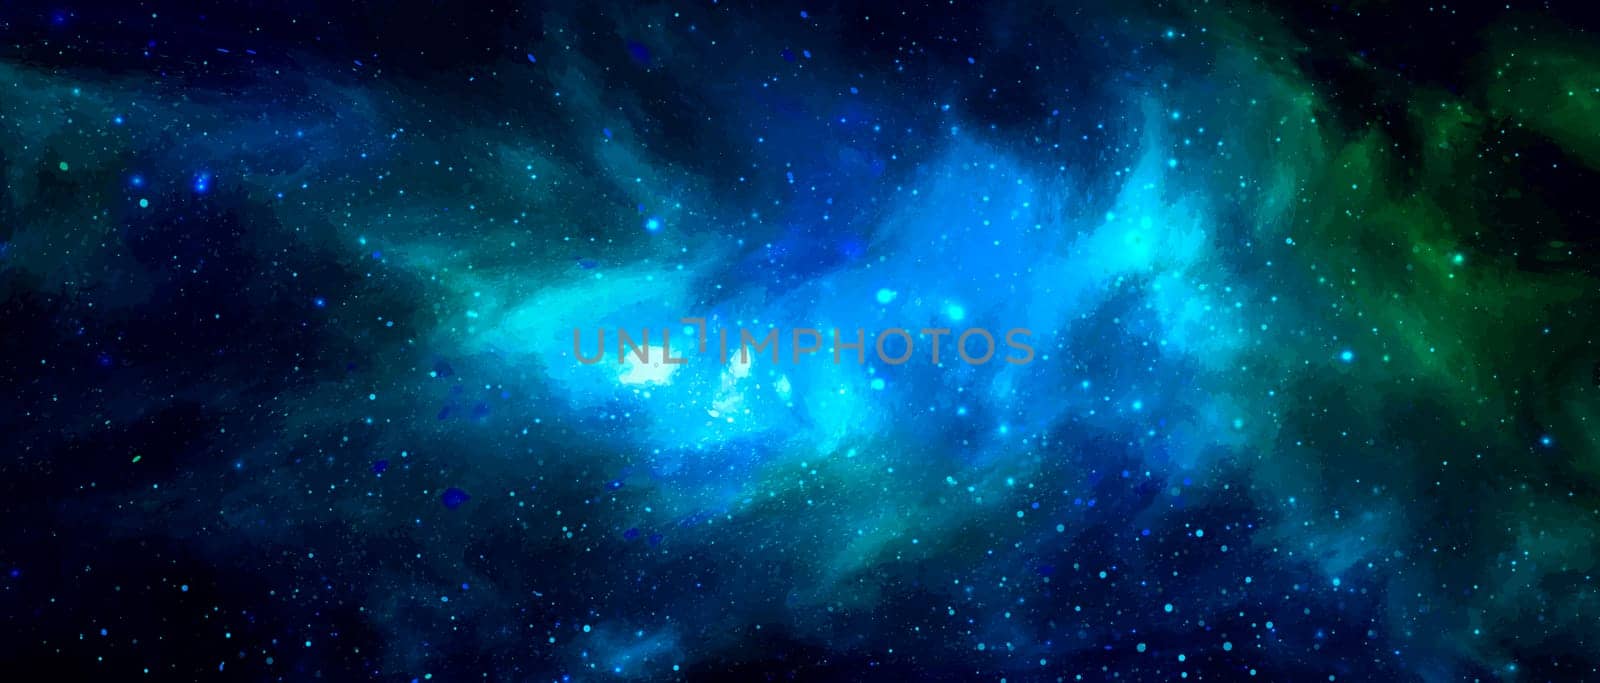 Space background with realistic nebula and shining stars. Magic colorful galaxy